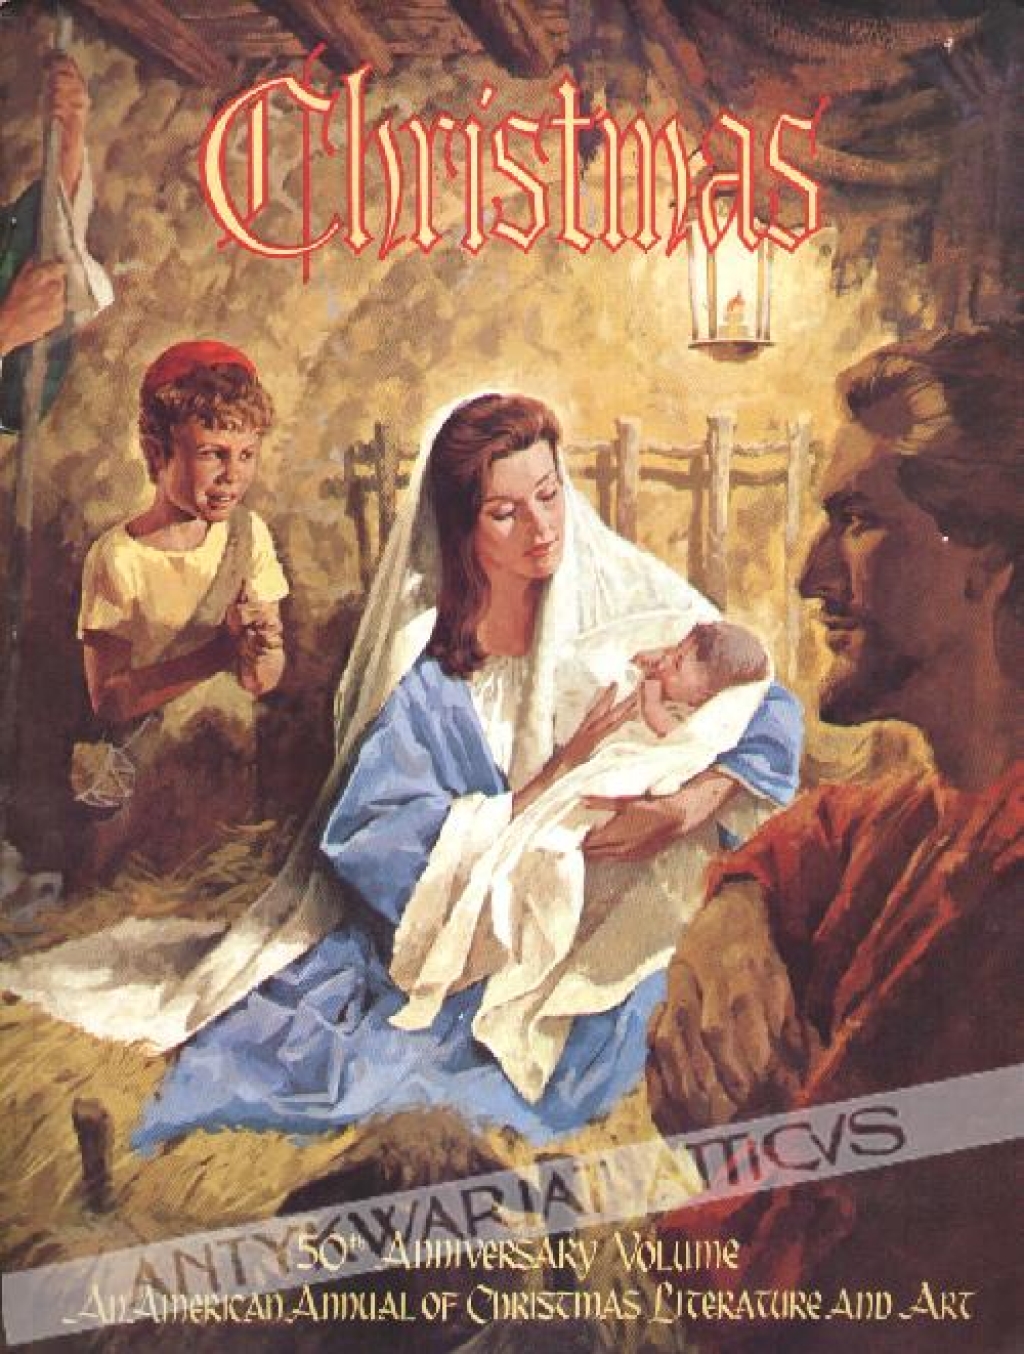 ChristmasAn American Annual of Christmas Literature and Art (50th Anniversary Volume)